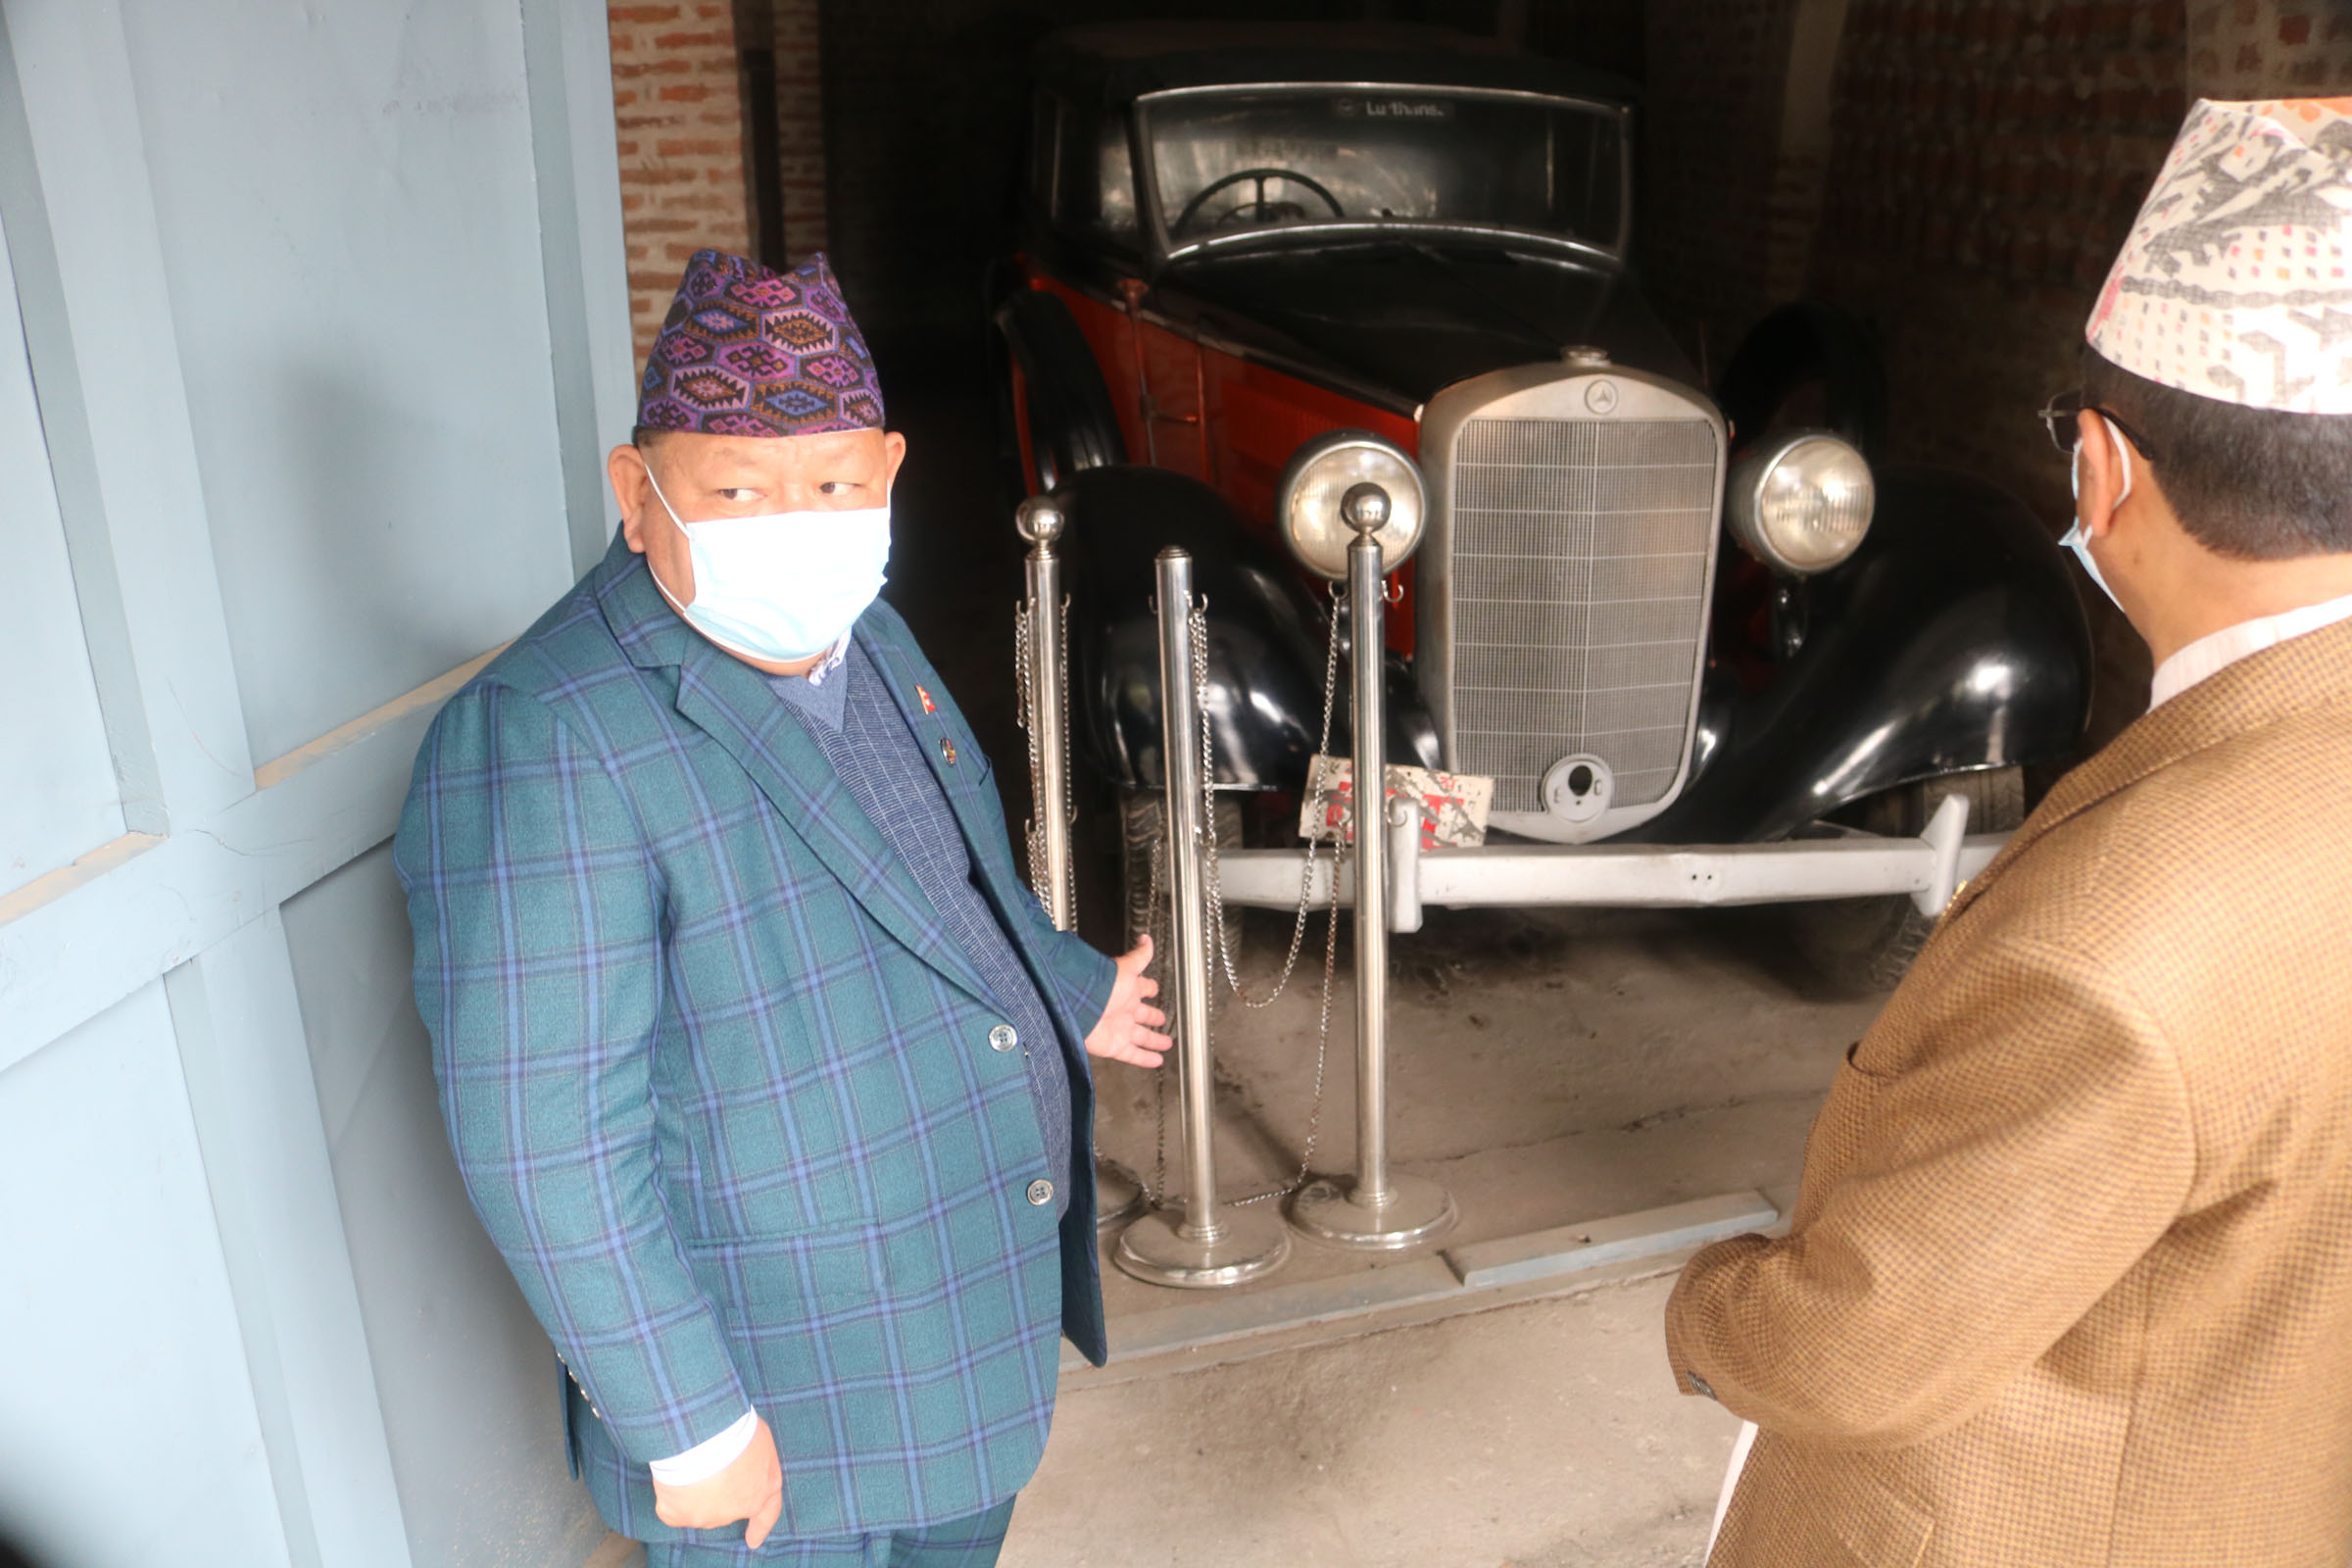 tourism-minister-aale-inspects-car-gifted-to-king-tribhuvan-by-hitler